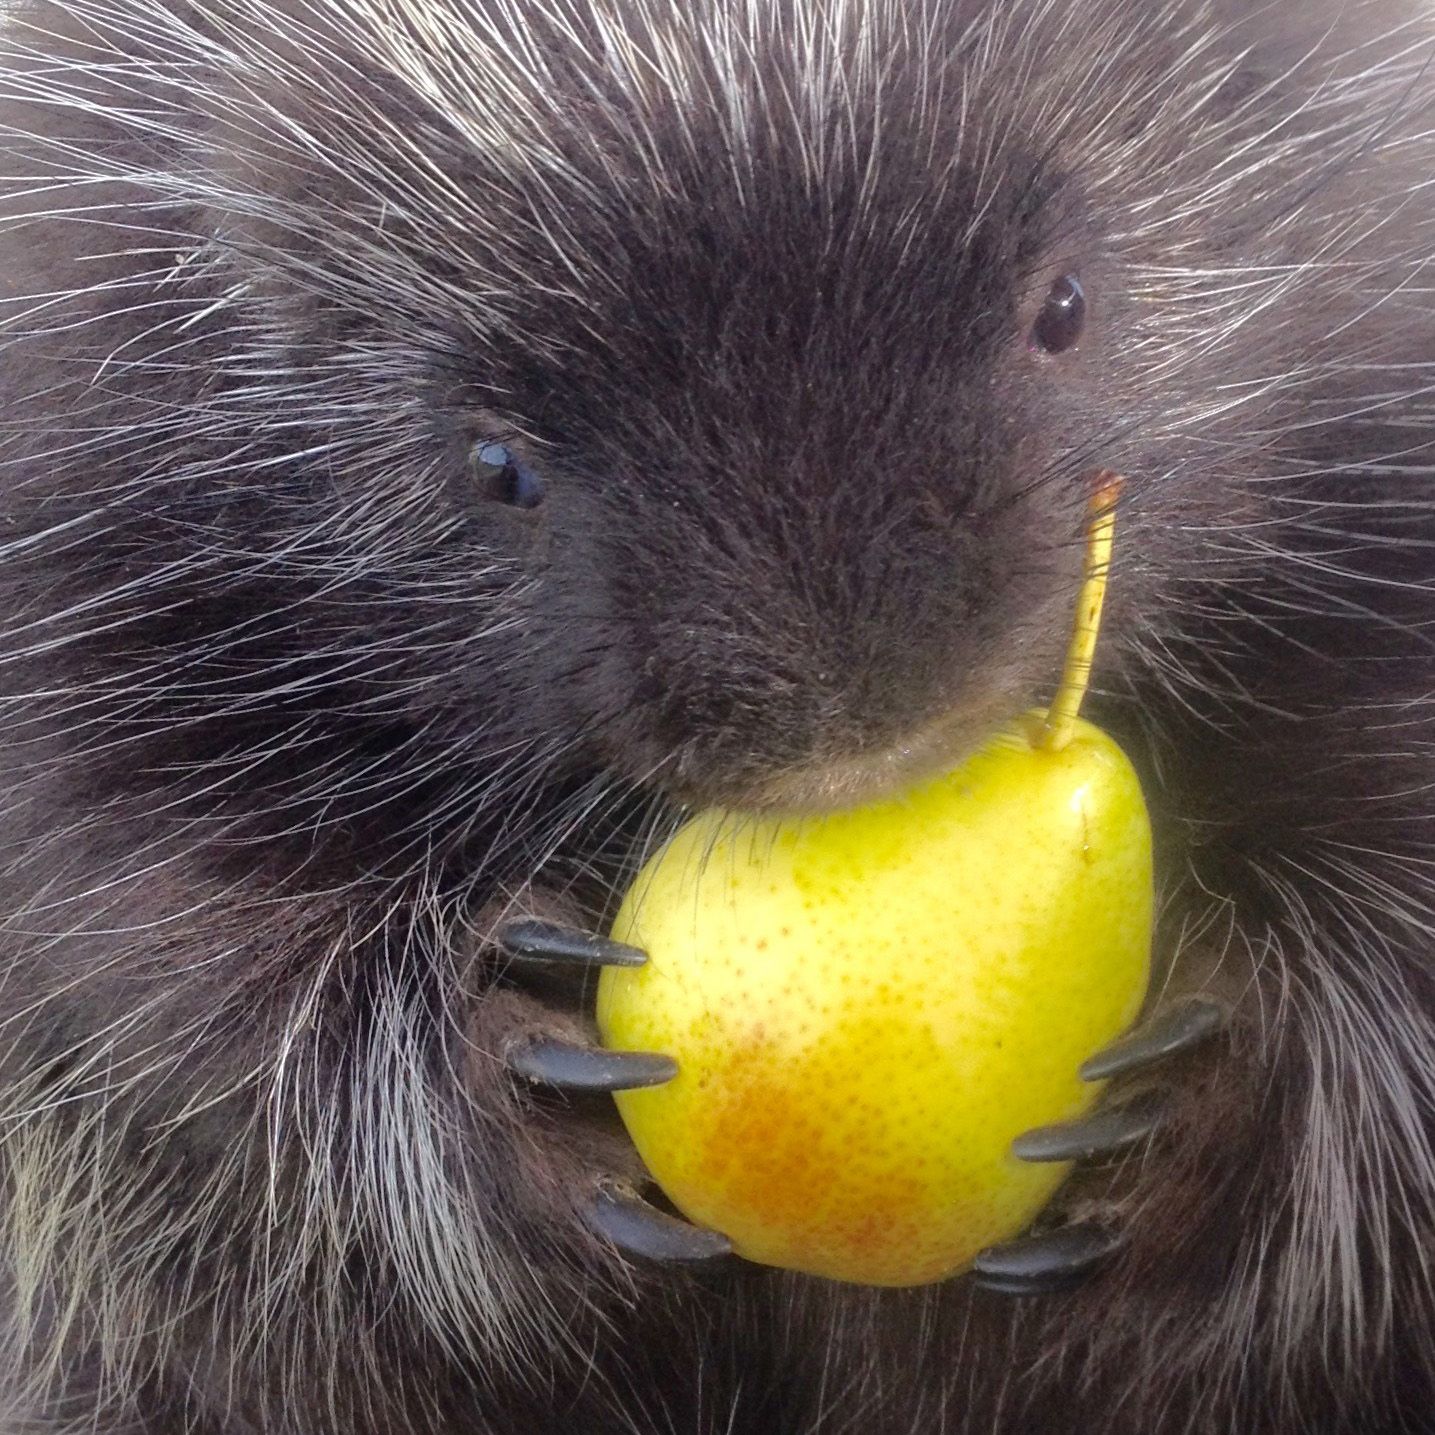 porcupine gnawing on a pumpkin, eyes closed in bliss